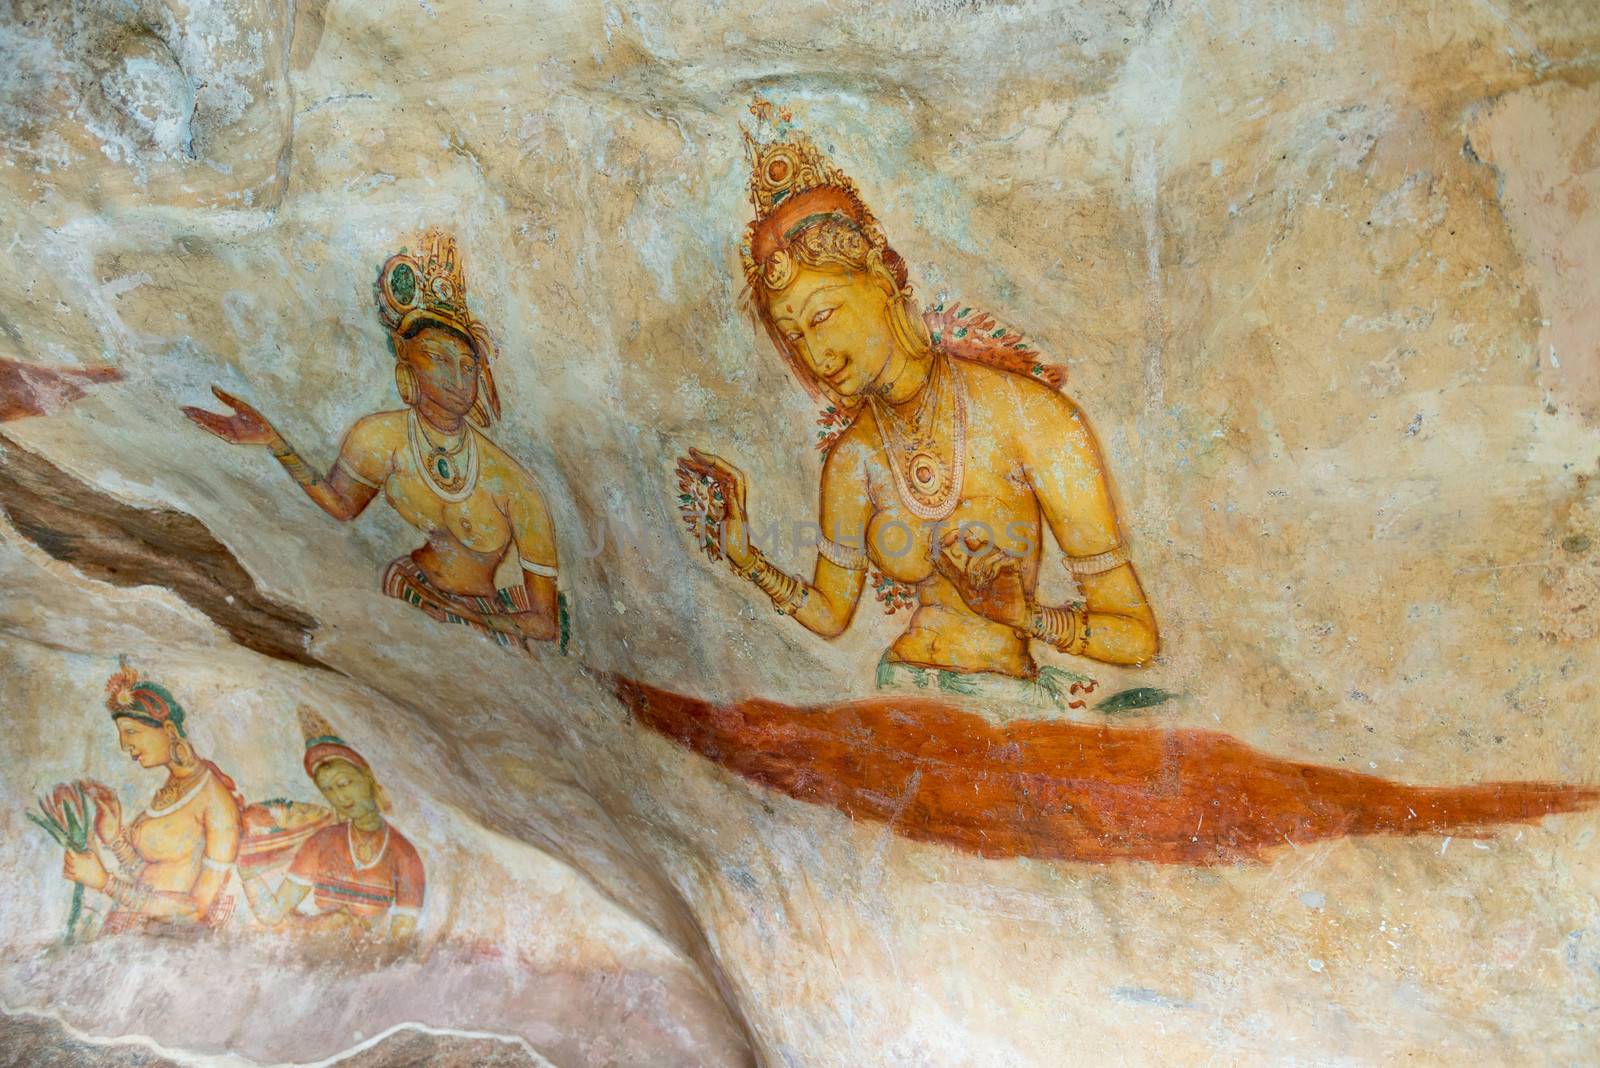 Ancient wall paintings of cloudy maidens. One of the 5th century frescoes at the ancient rock fortress of Sigiriya, Sri Lanka. 